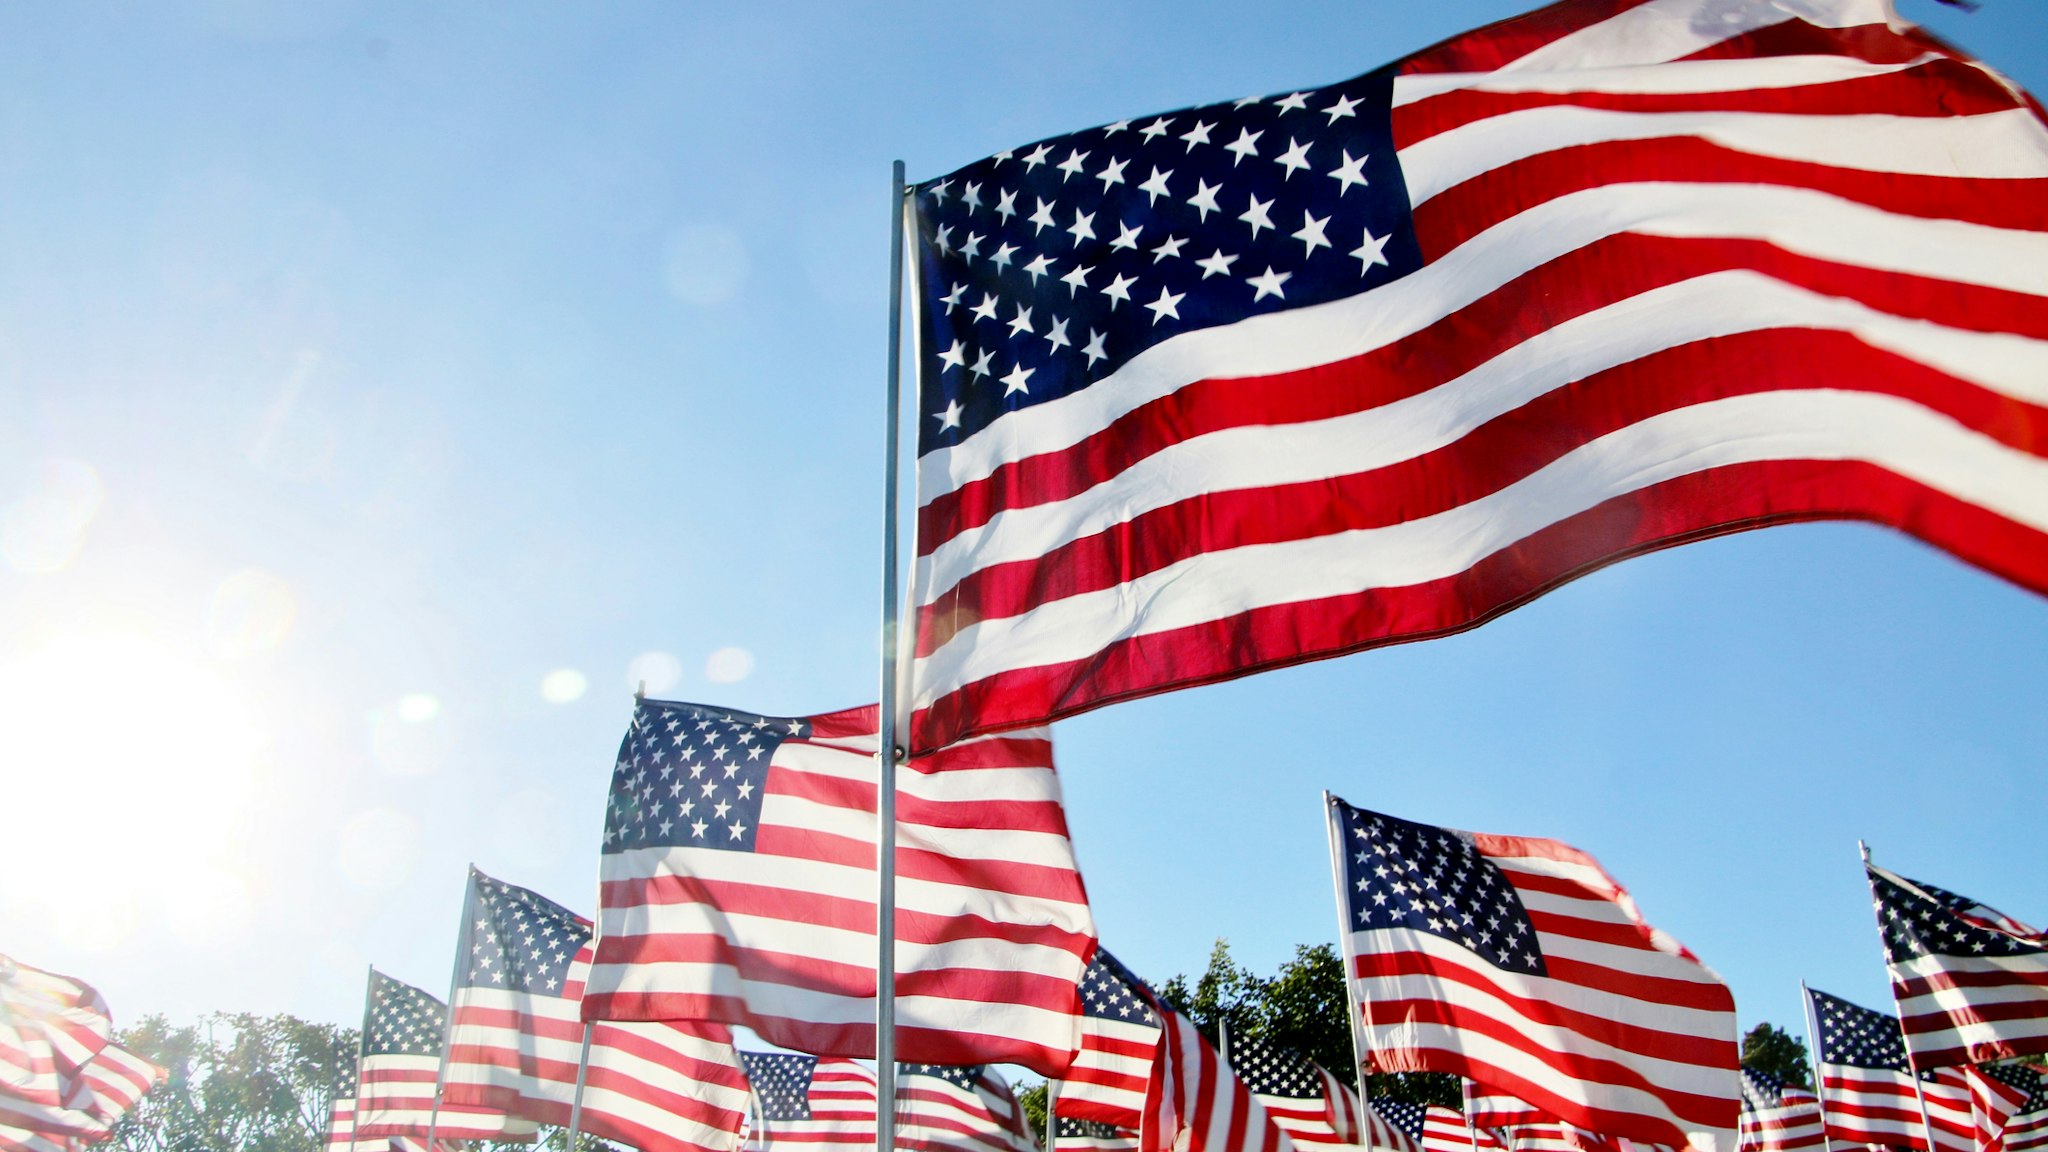 United States flags blow in the wind in Malibu, CA - stock photo